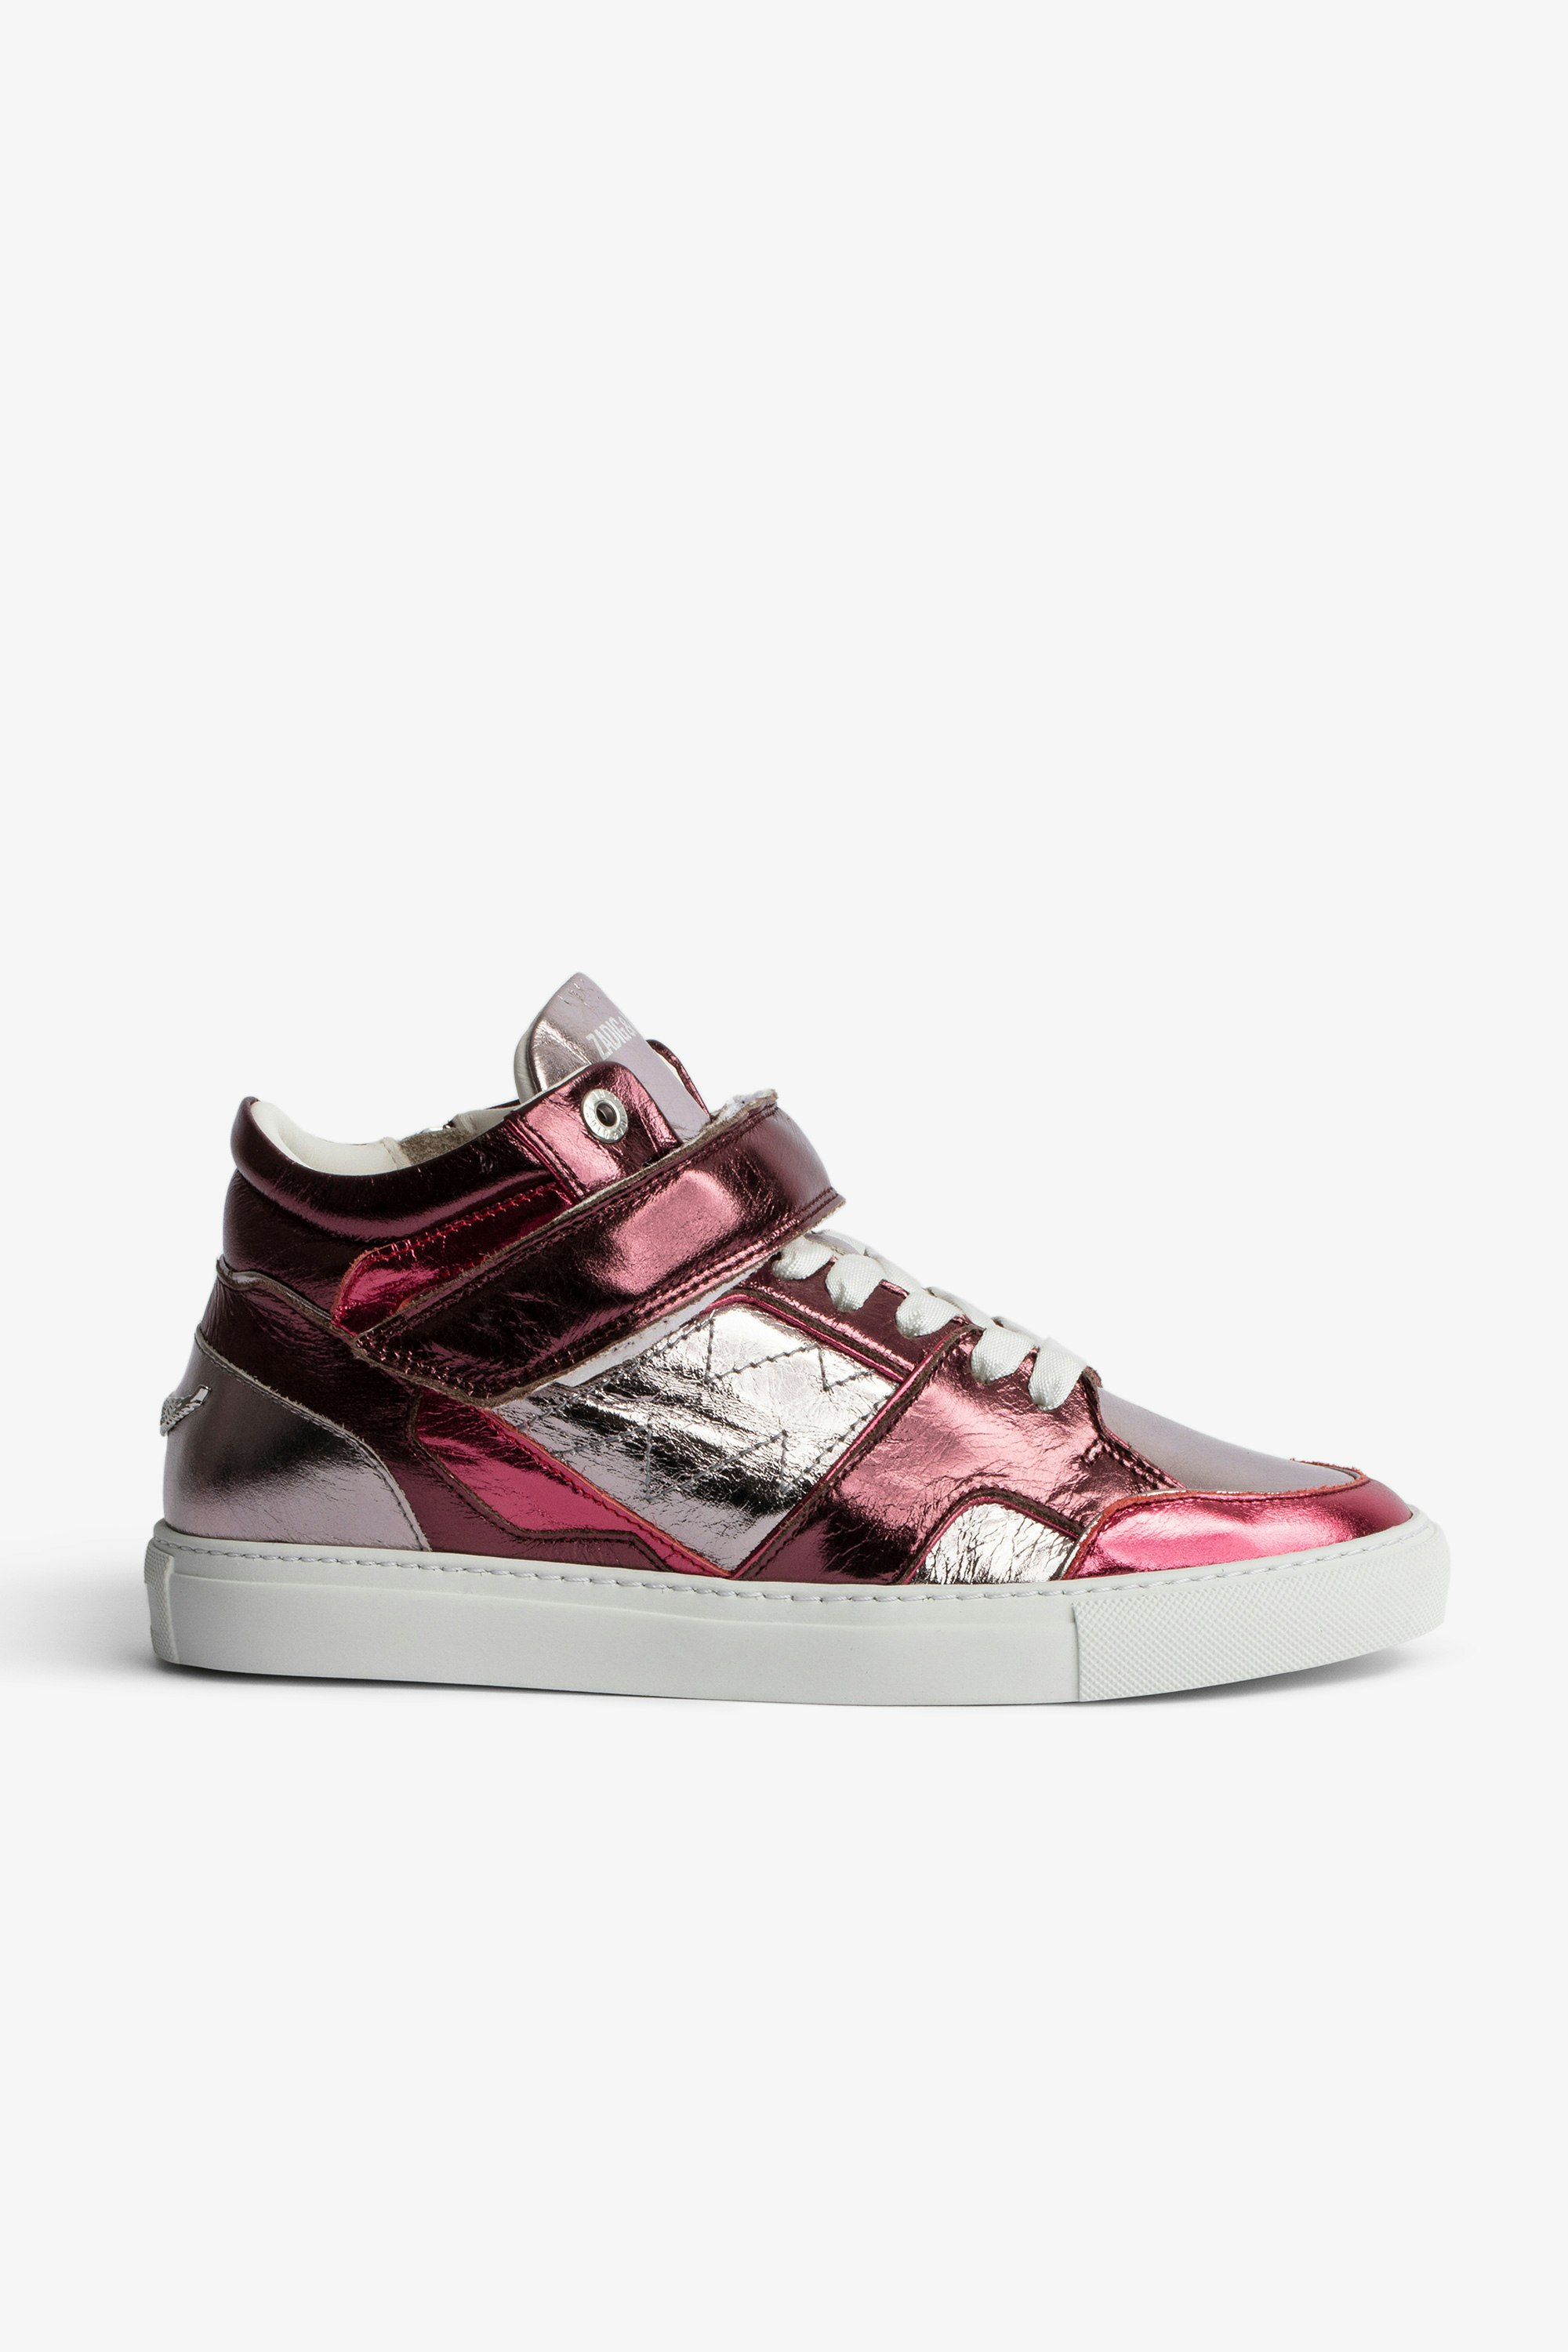 ZV1747 Mid Flash Vintage Metal Mix Sneakers - Women’s mid-top sneakers in silver and red metallic leather